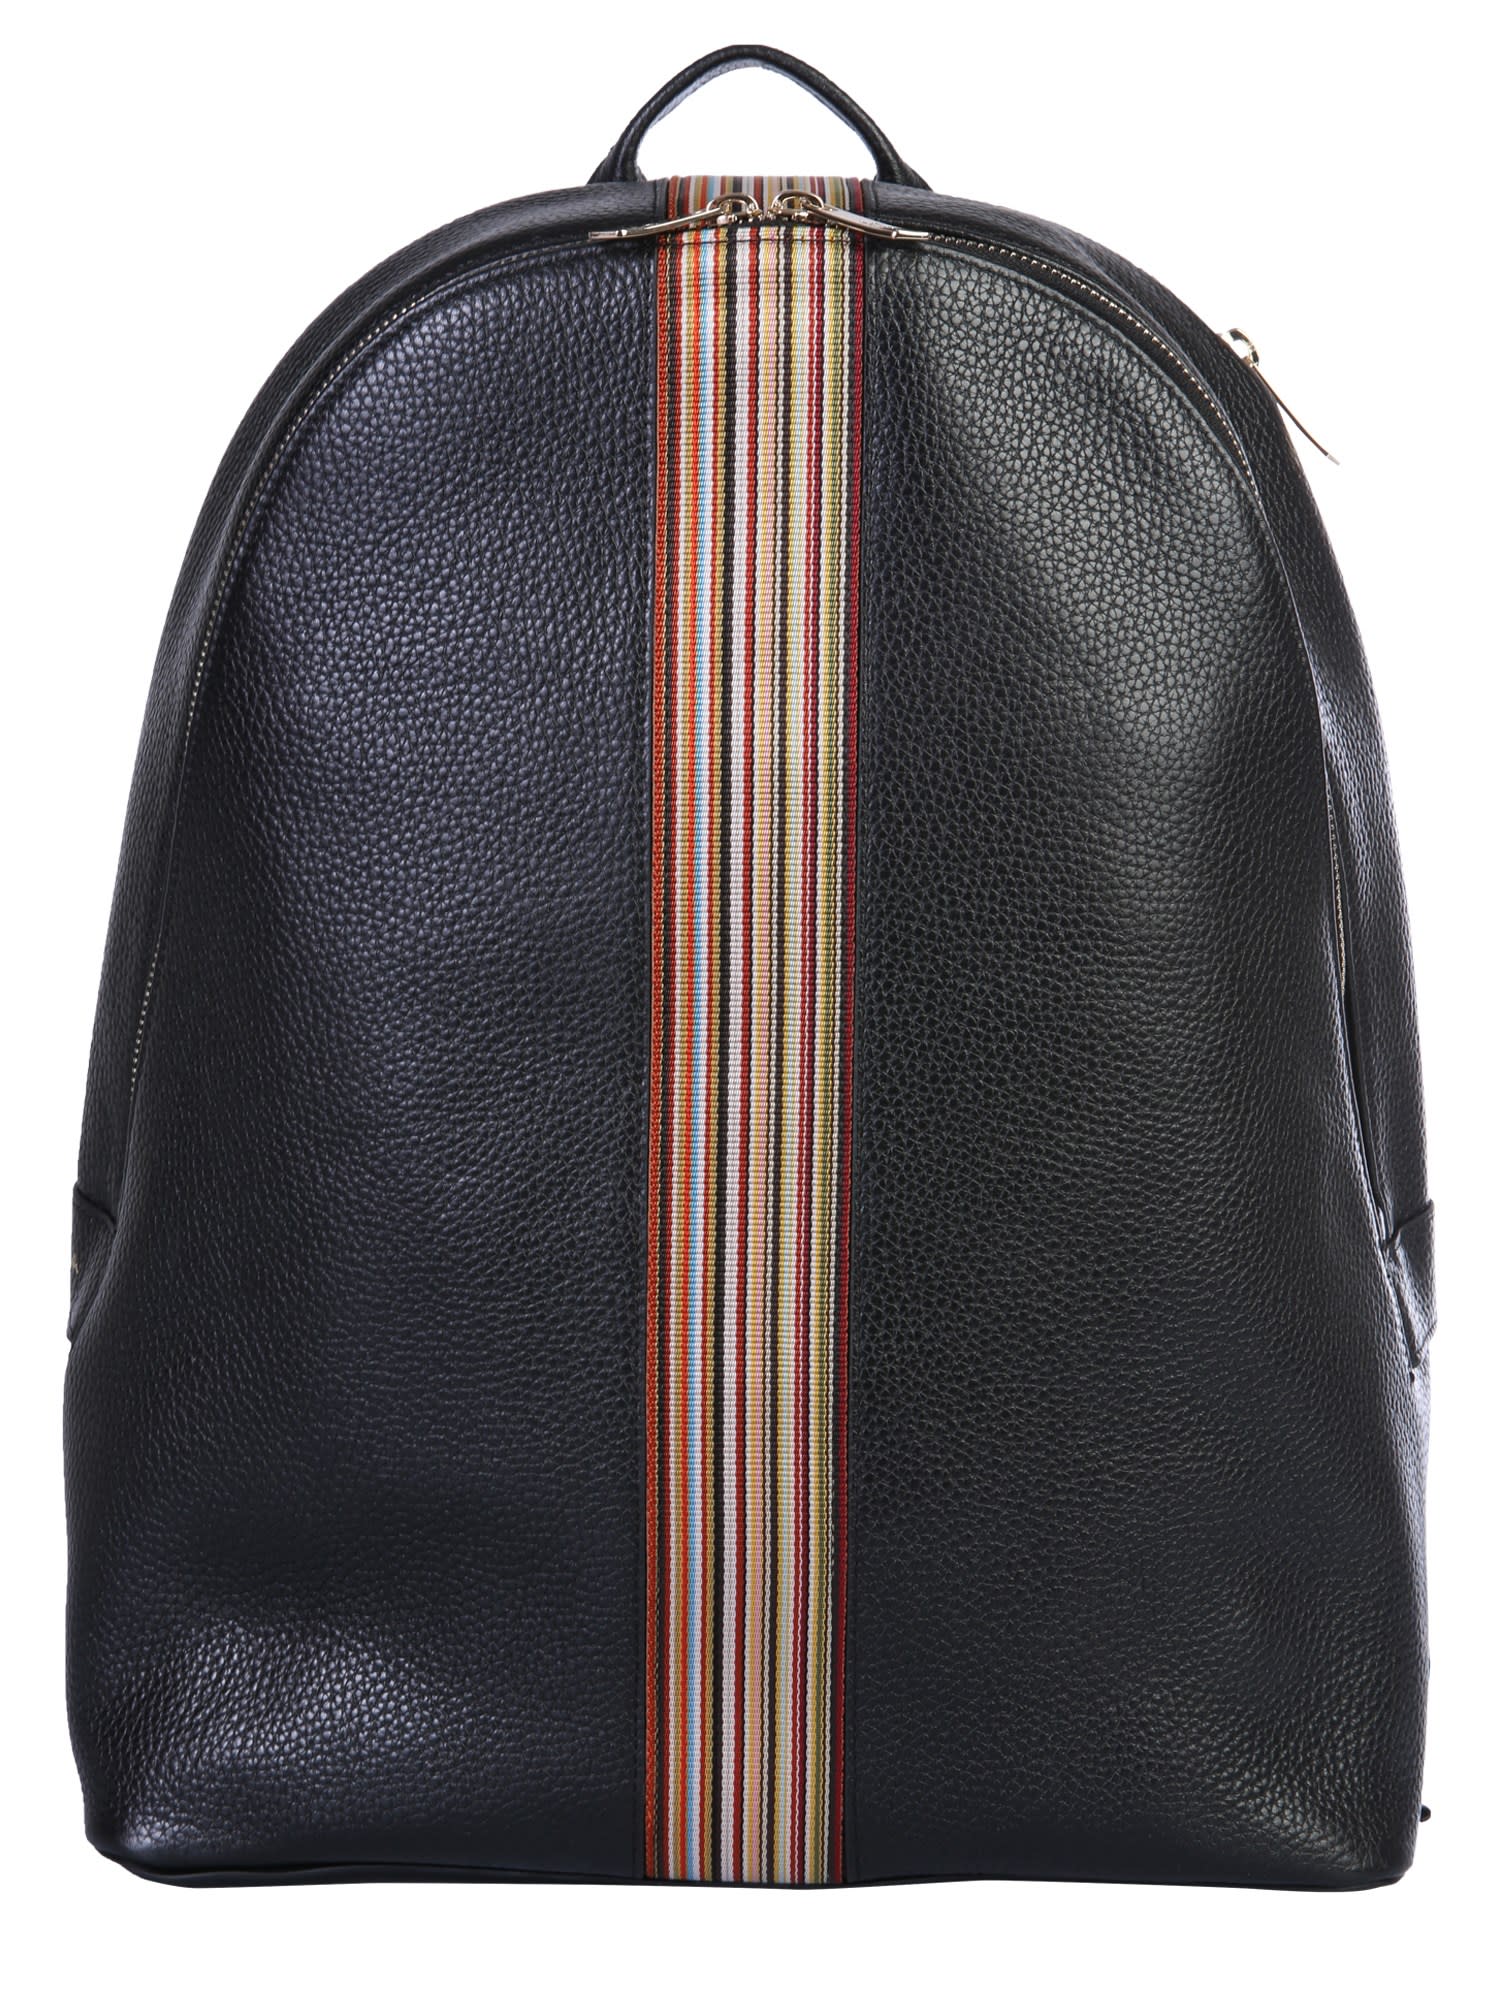 PAUL SMITH BACKPACK WITH ICONIC STRIPES,11294403